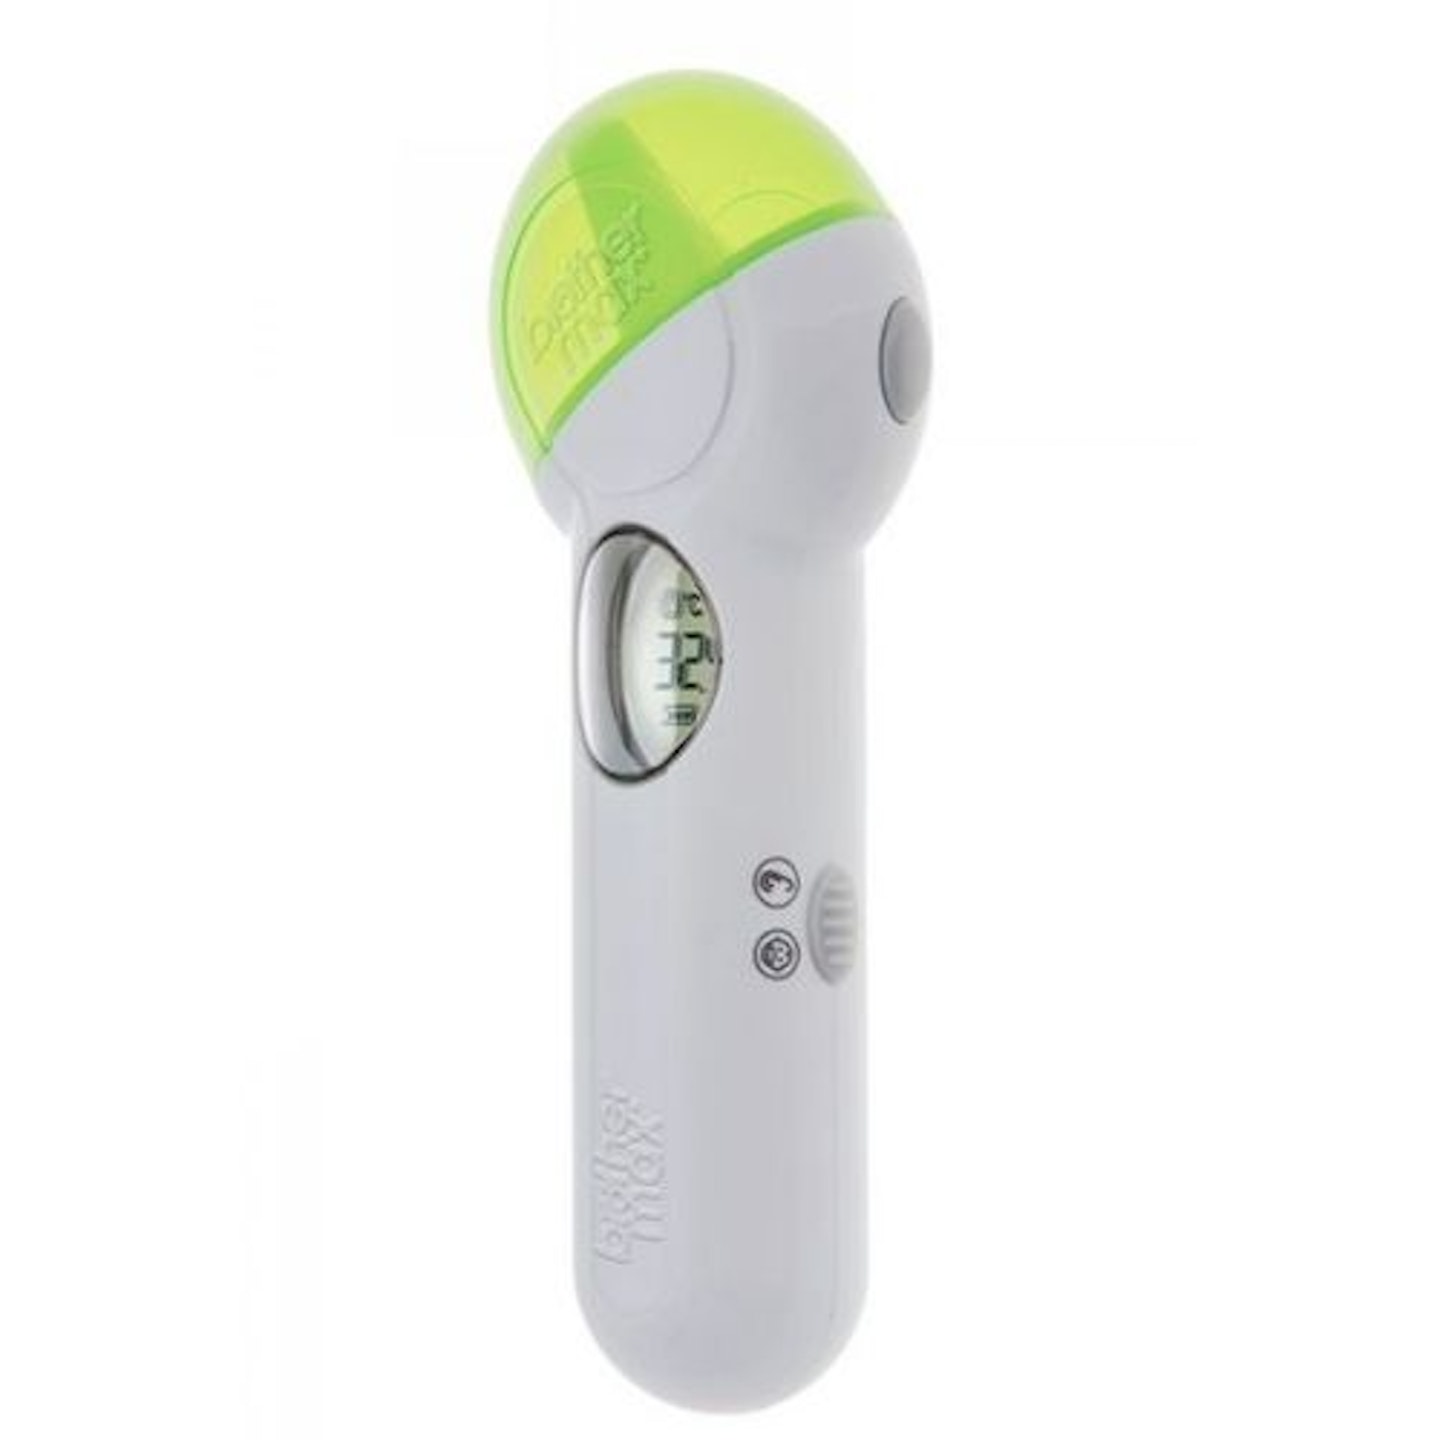 Brother Max Infrared Digital 2-in-1 HeadEar Thermometer